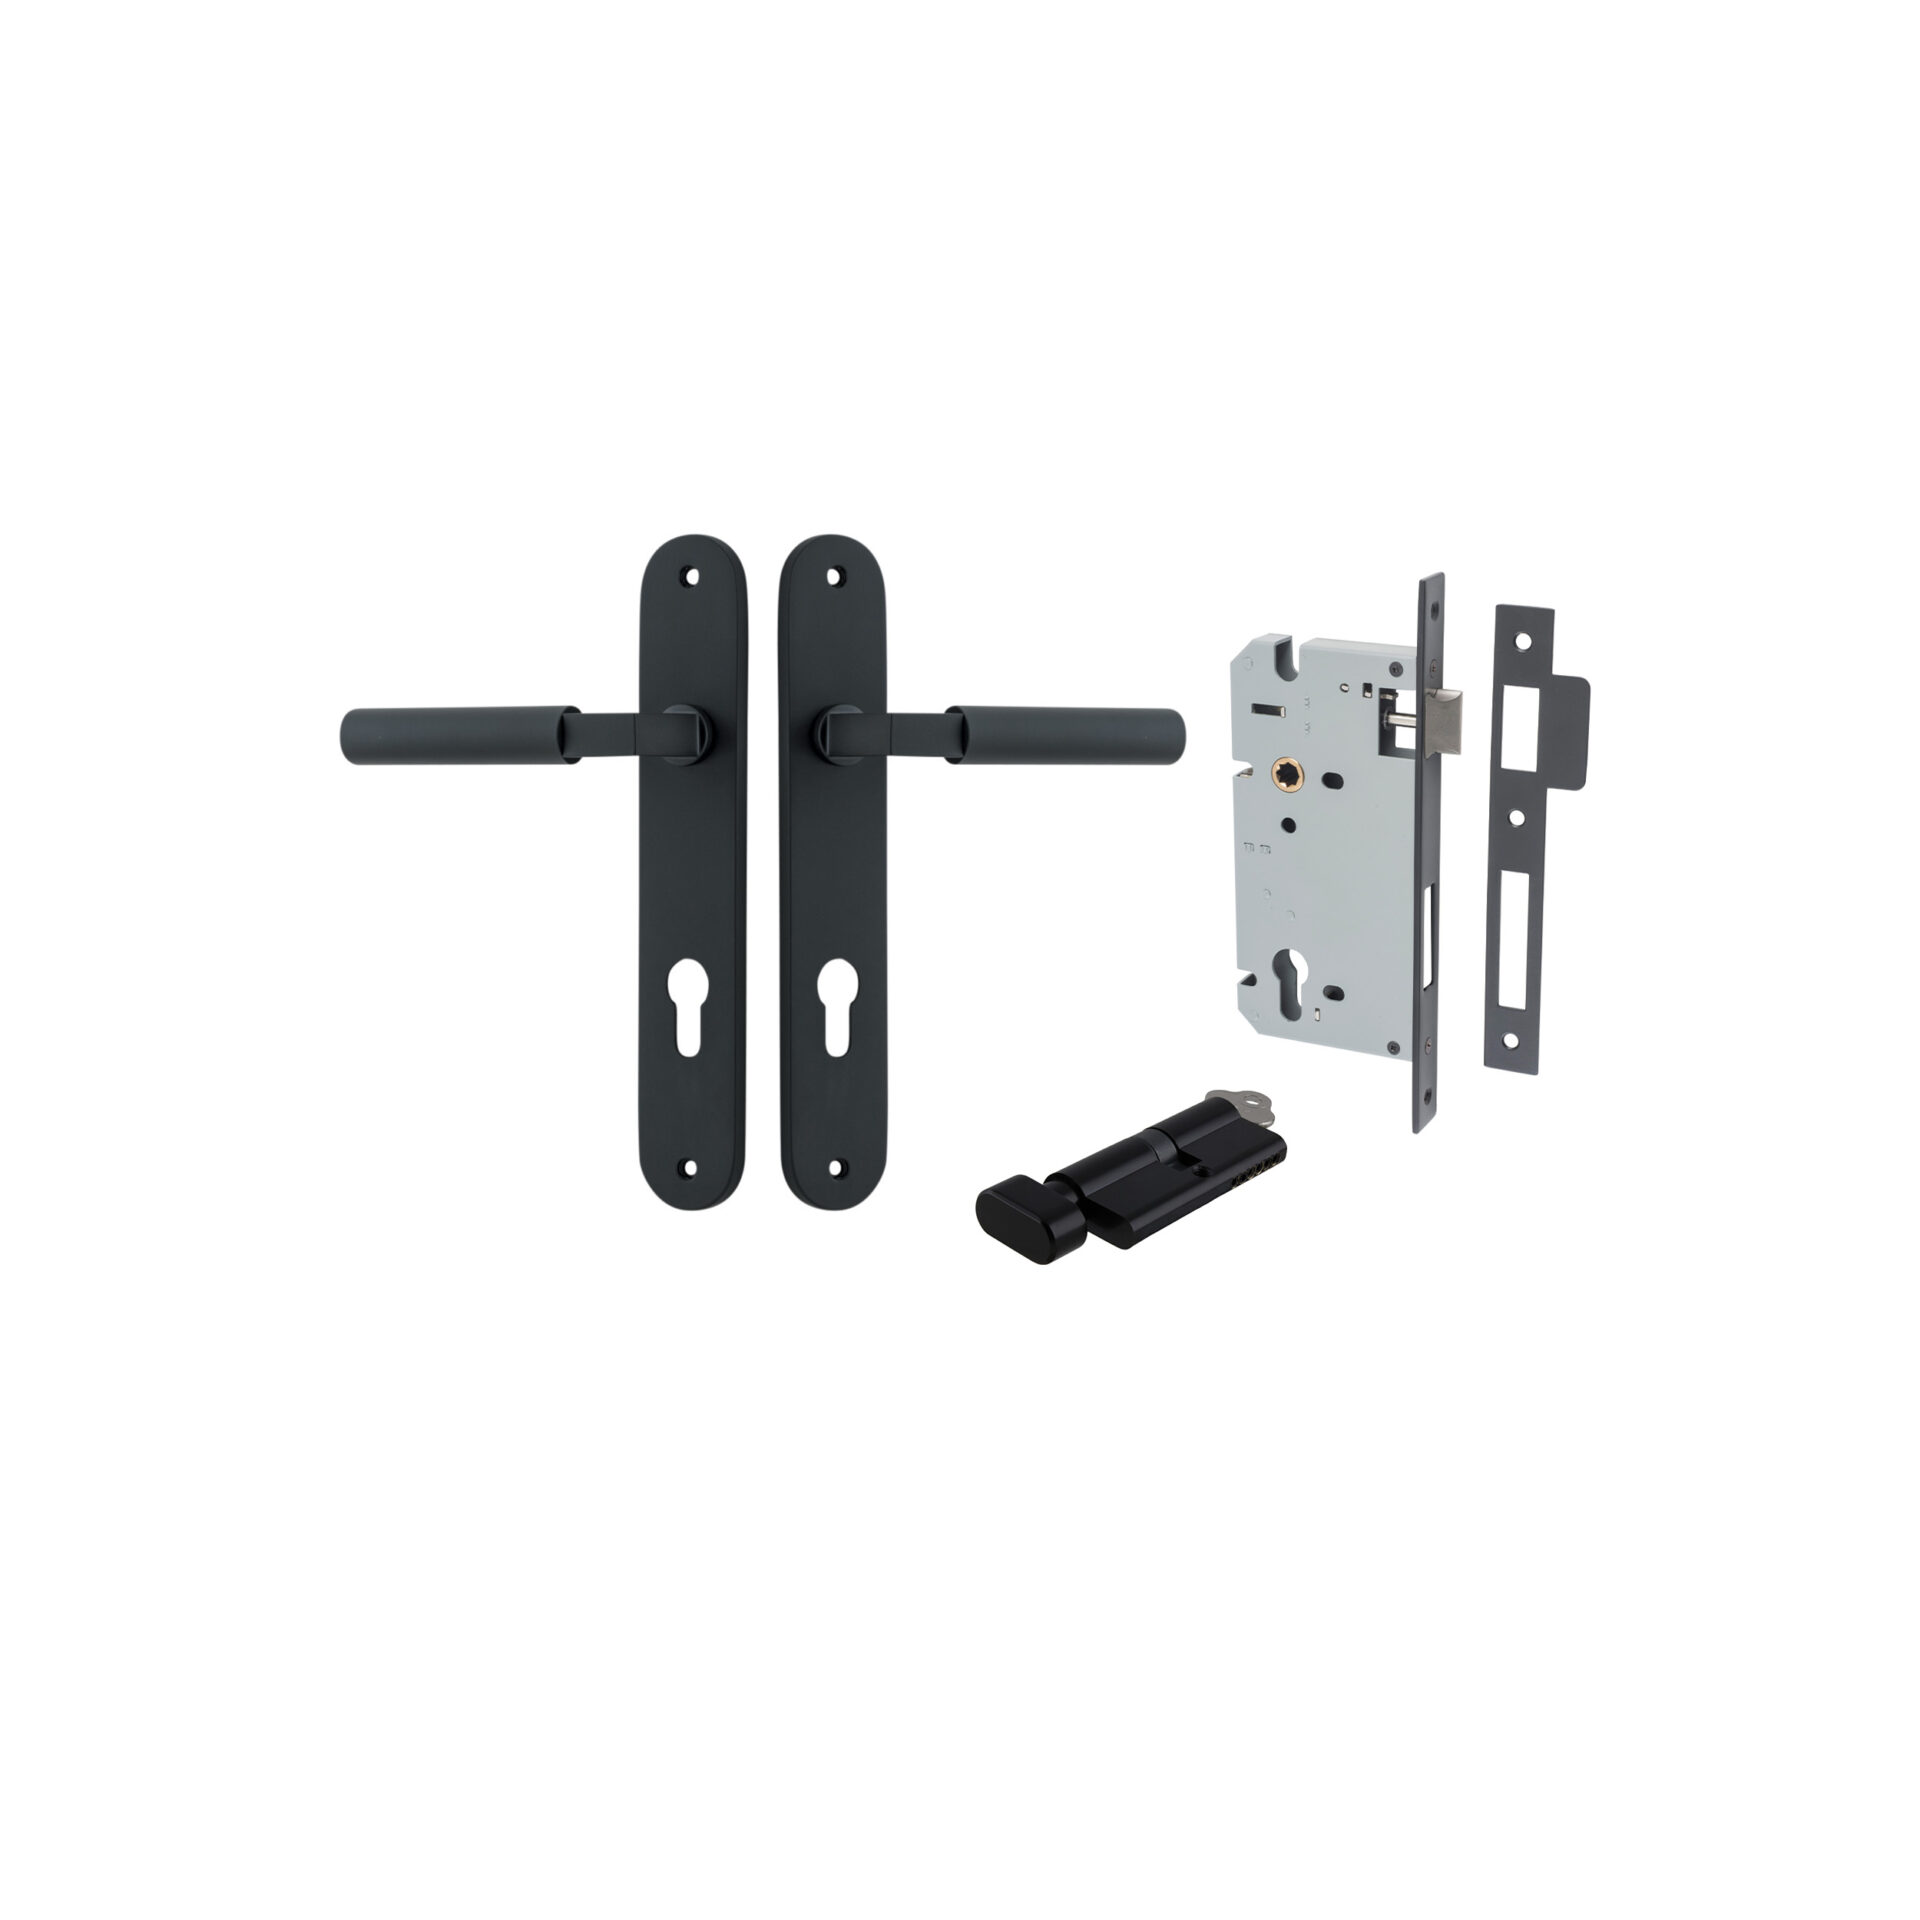 Berlin Lever - Oval Backplate Entrance Kit with High Security Lock